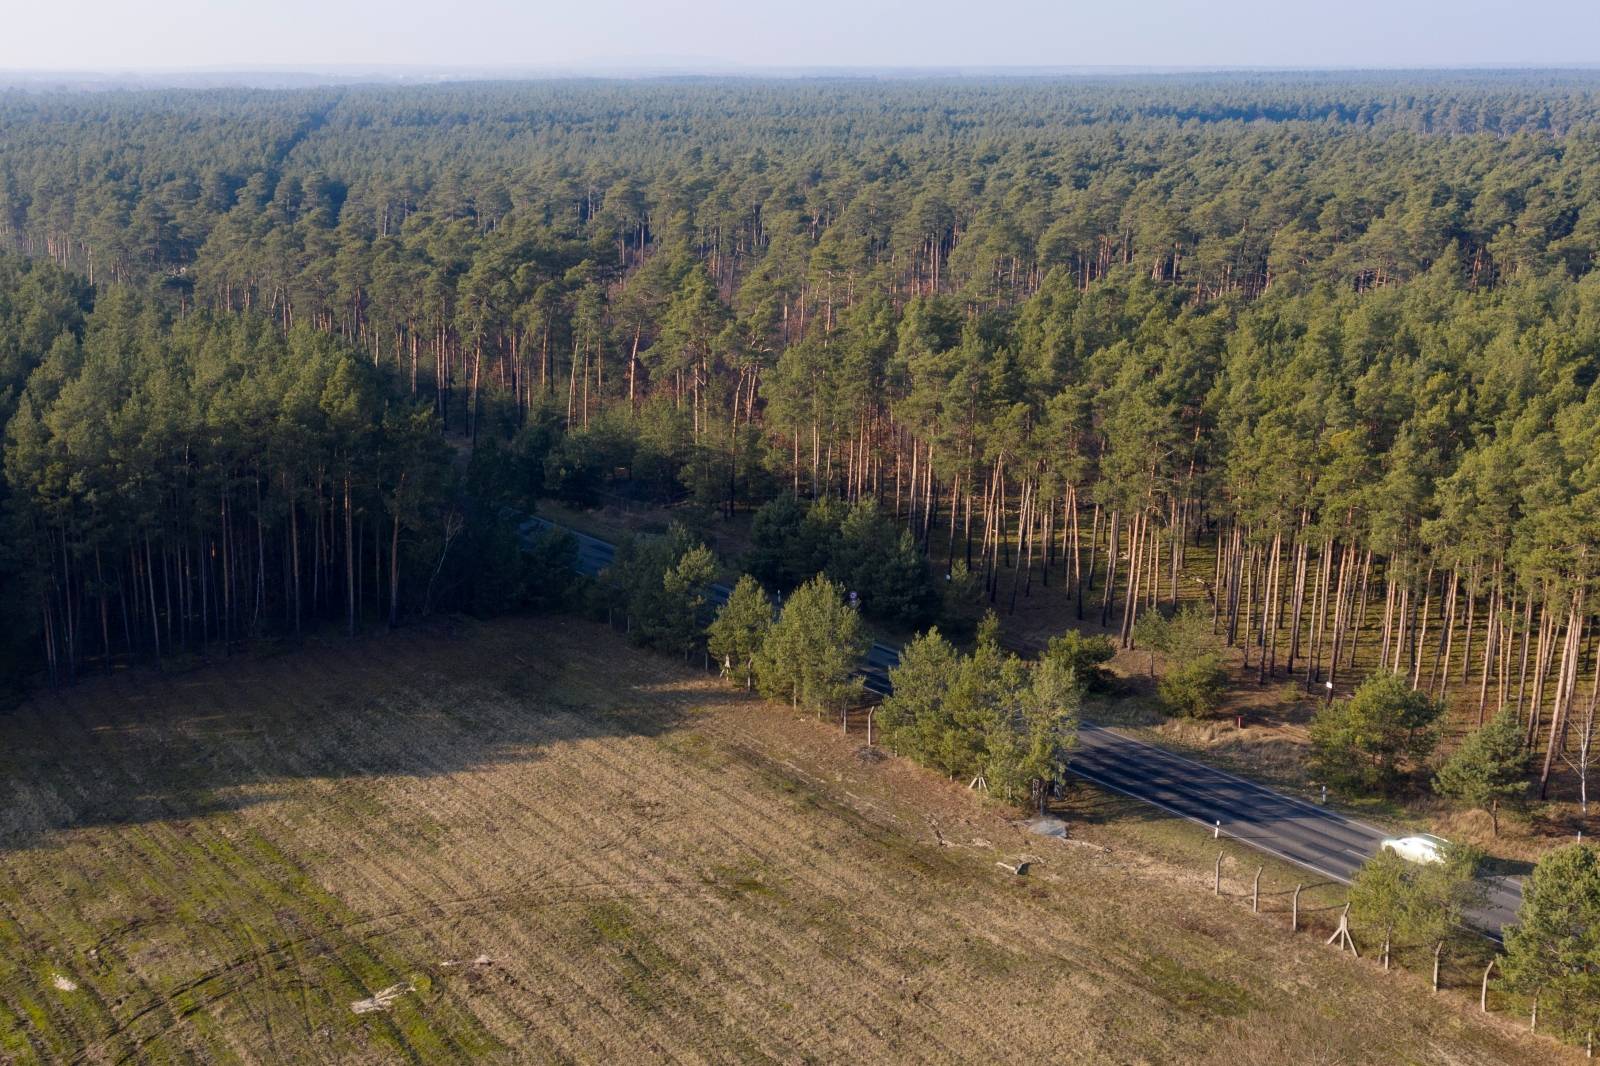 An aerial picture shows the area where the U.S. electric vehicle pioneer Tesla will build its first European factory and design center in Gruenheide near Berlin